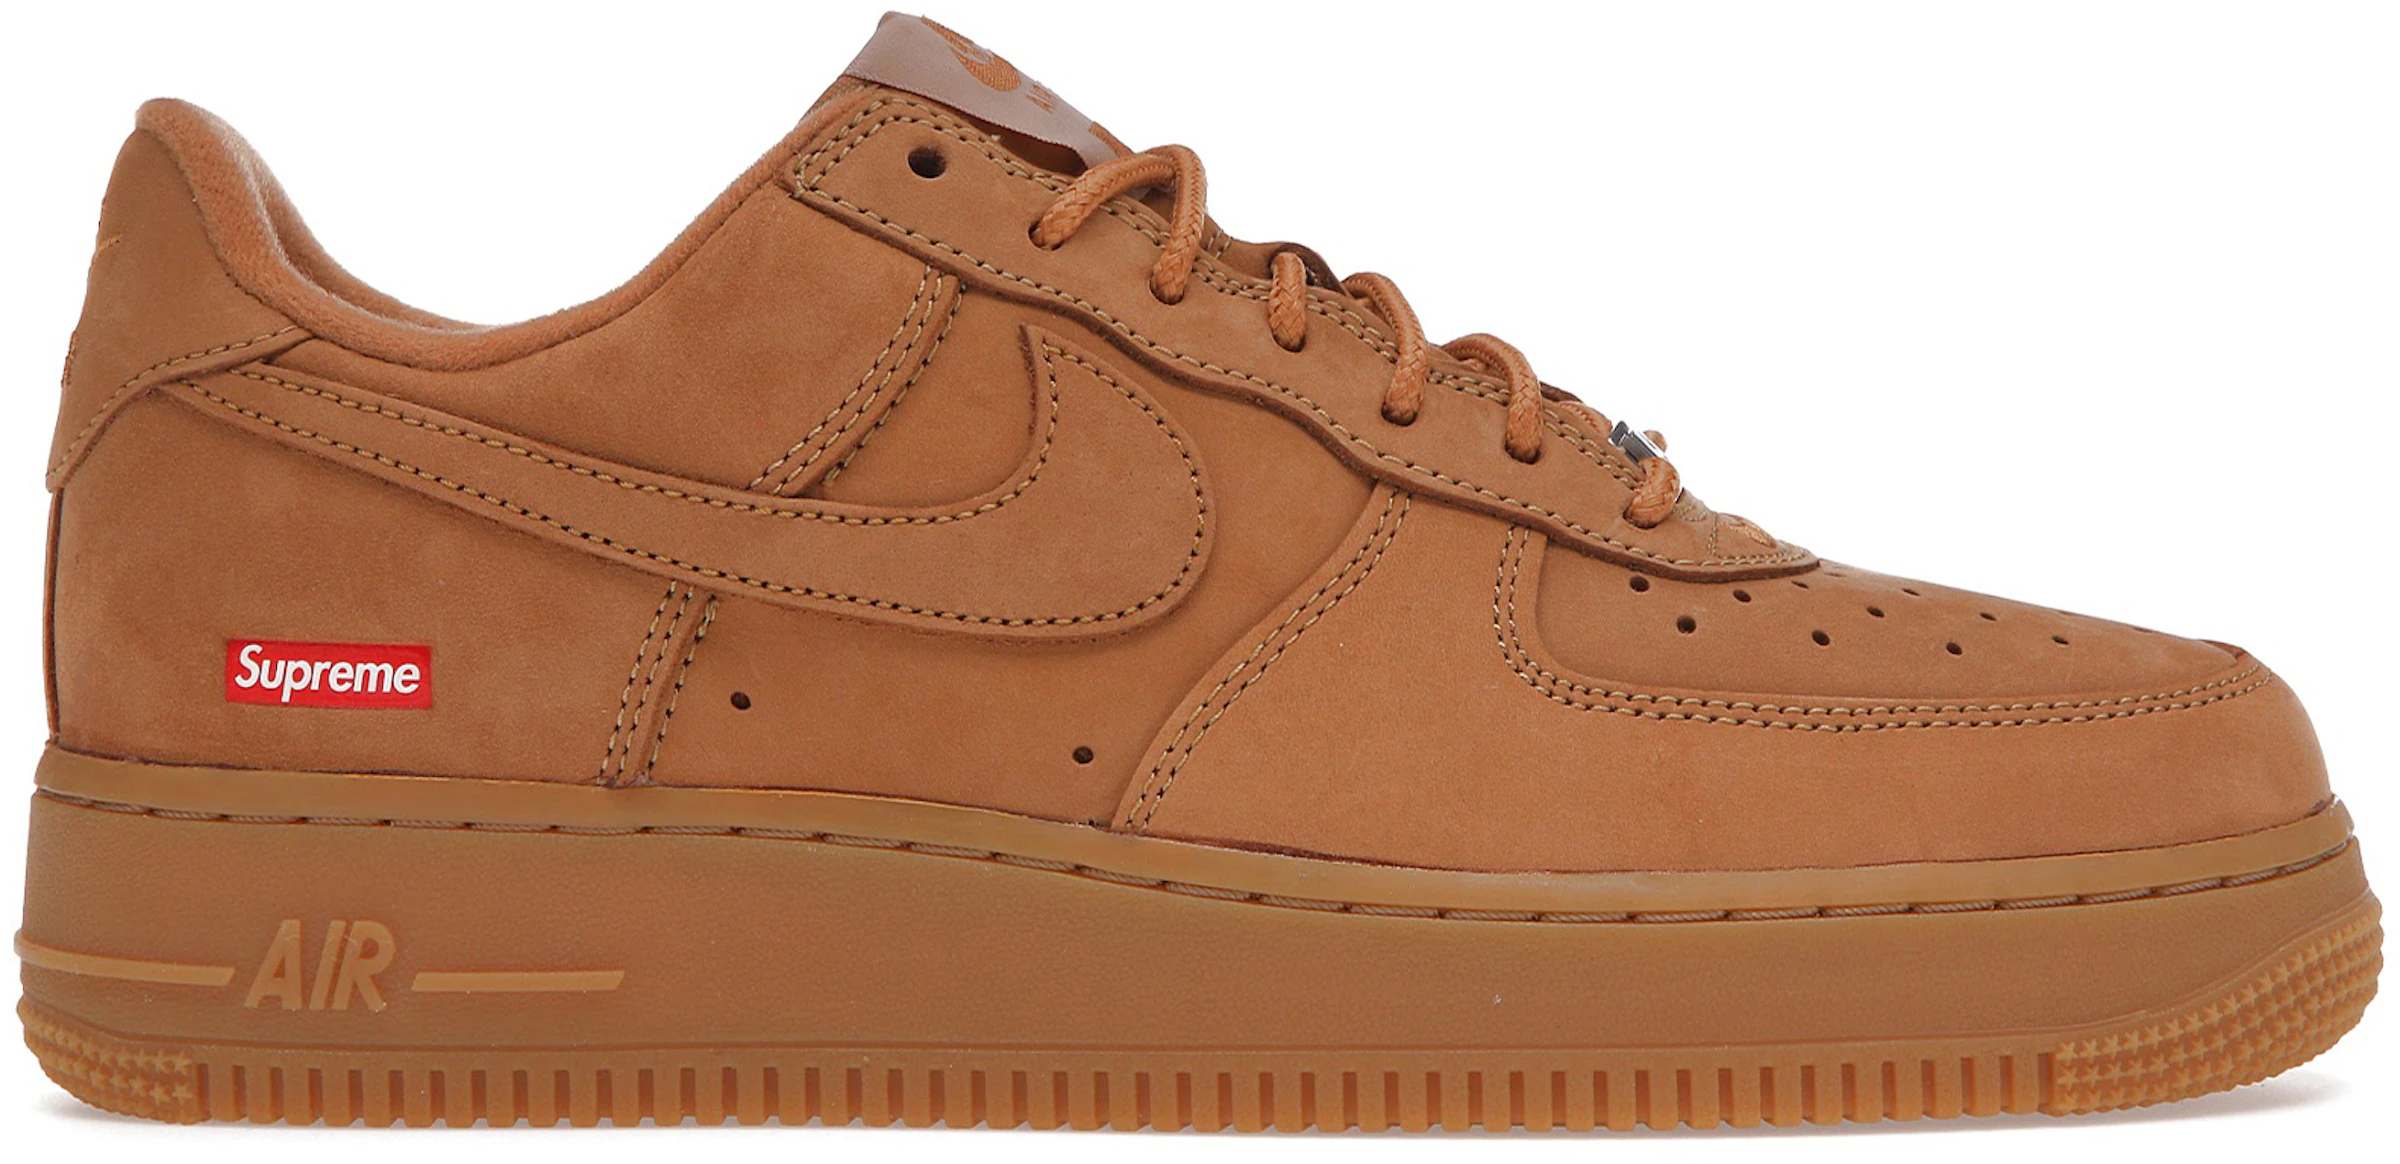 Nike Air Force 1 Low SP Supreme Wheat - DN1555-200 -